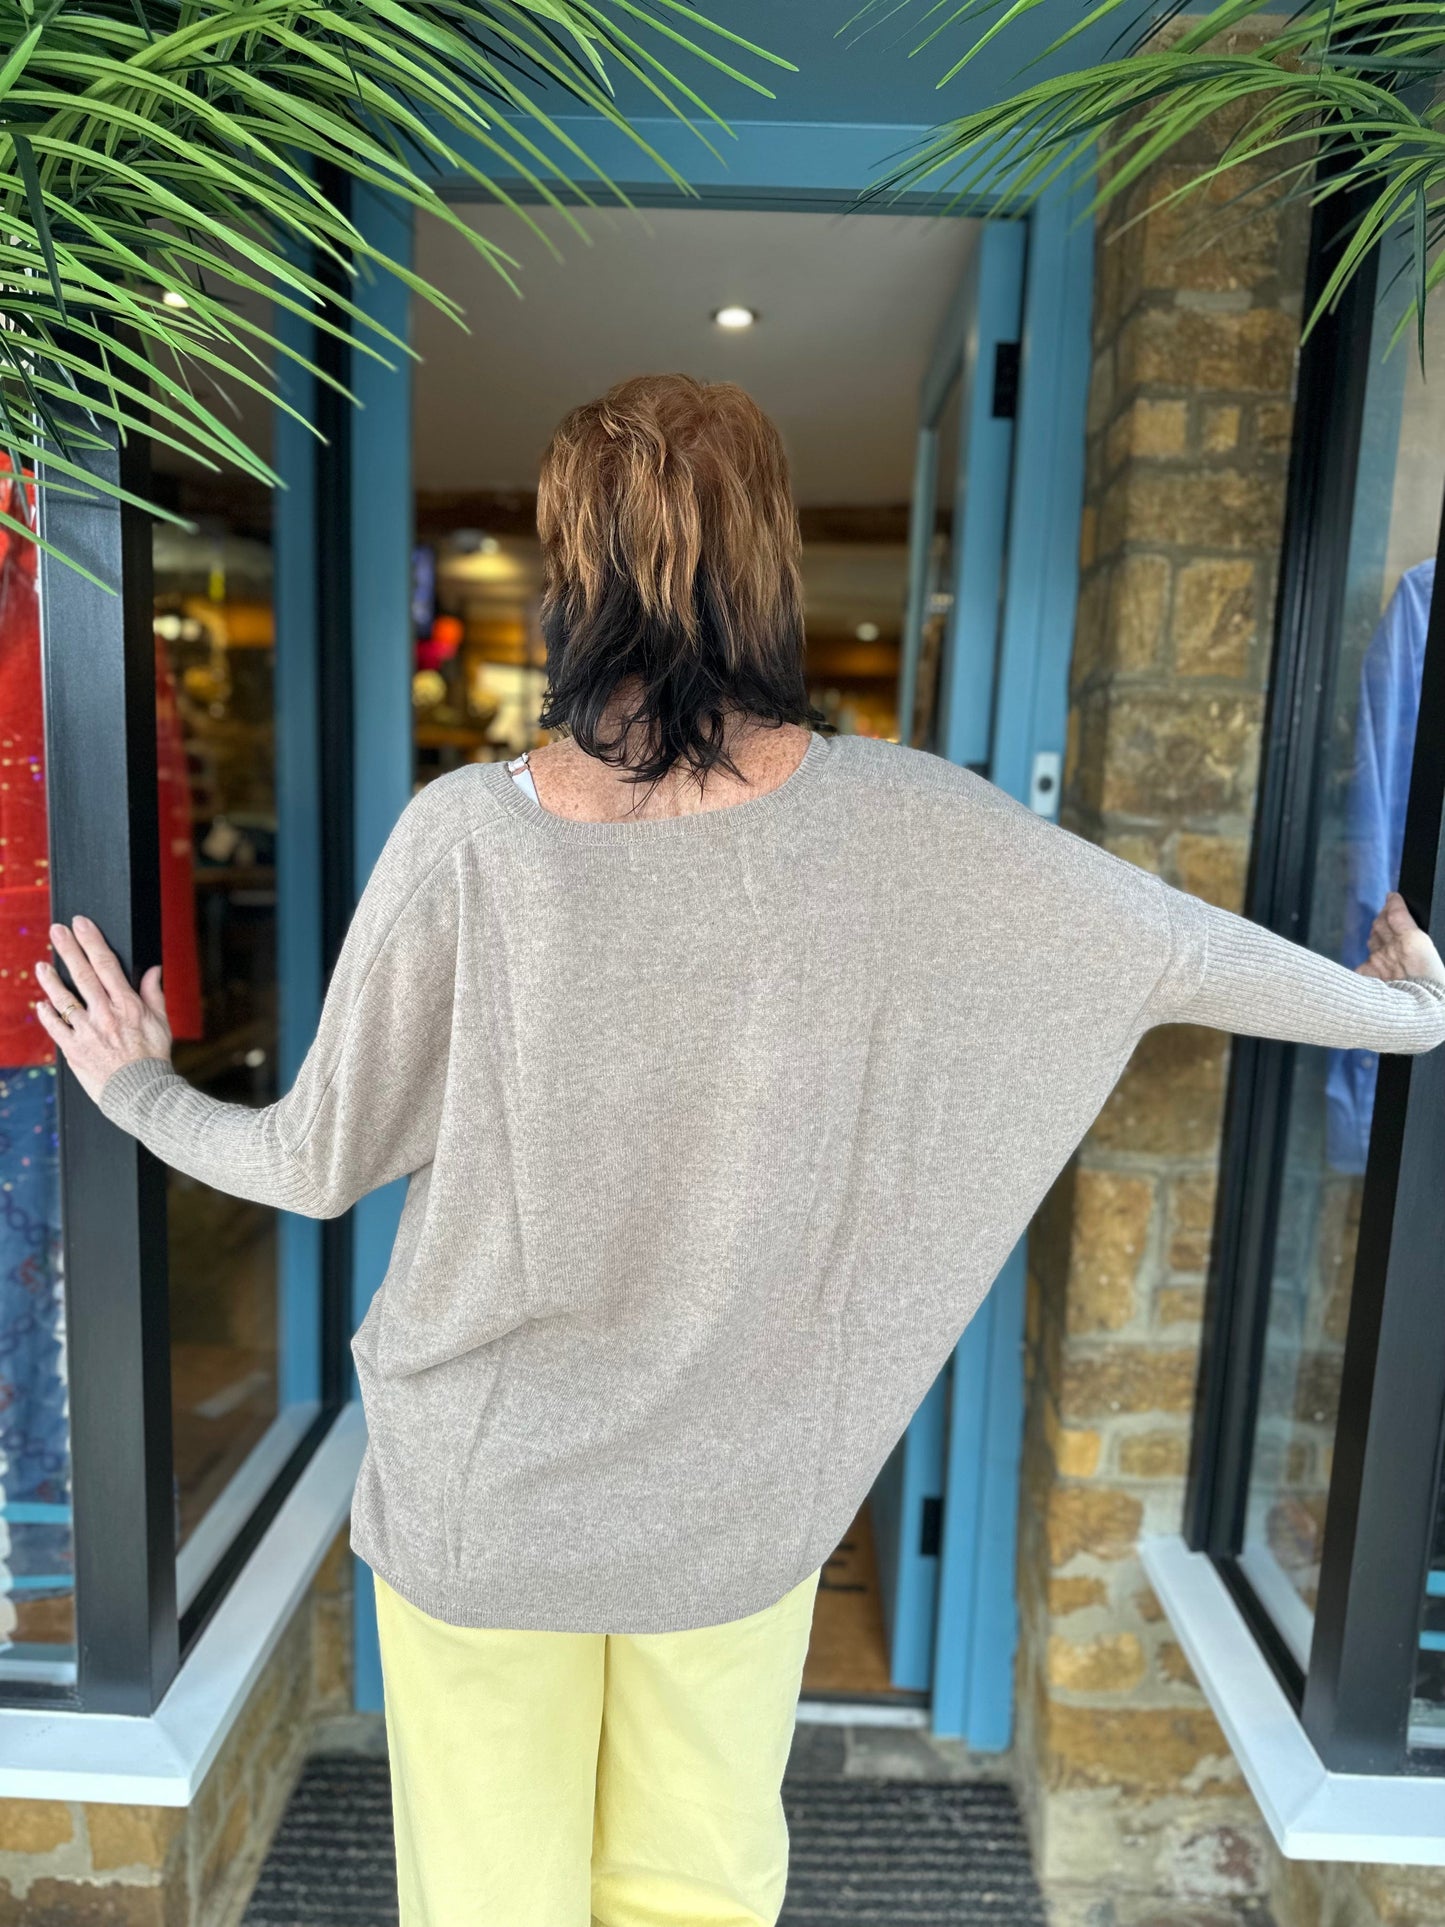 NOT SHY Knitwear Faustine Cashmere Jumper in Nomad